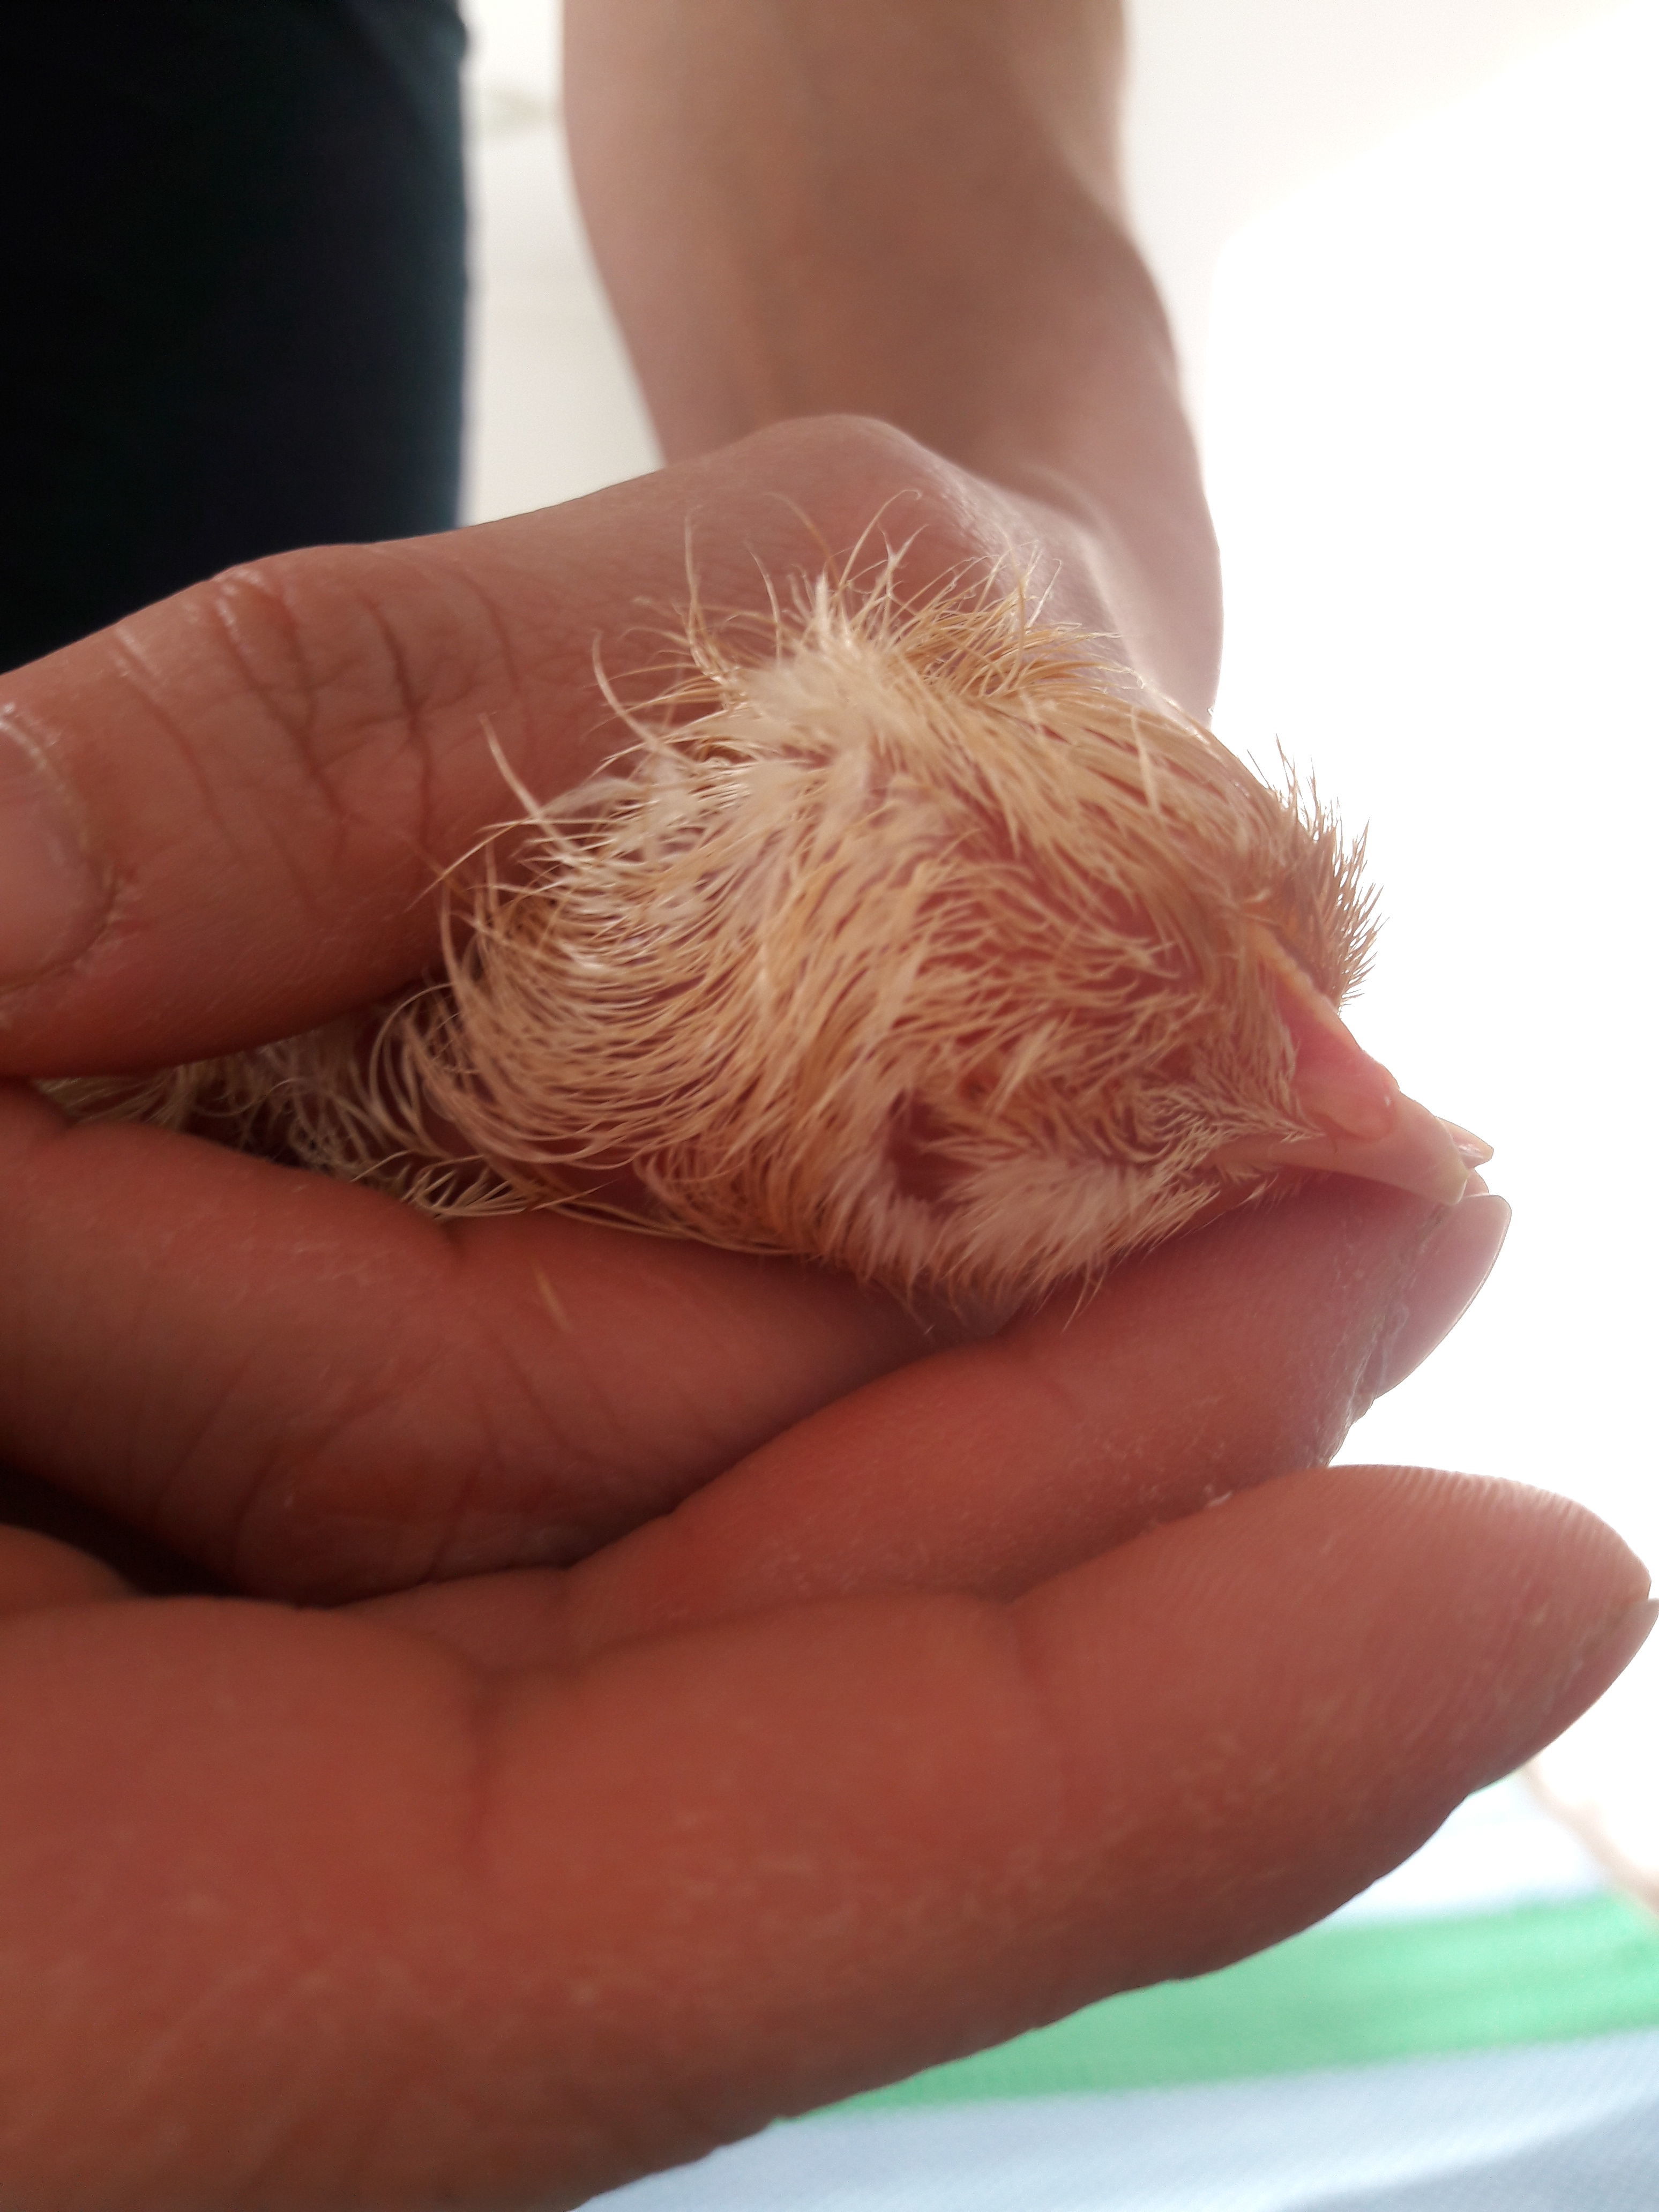 Chick born without one eye and misaligned beak | BackYard Chickens - Learn  How to Raise Chickens